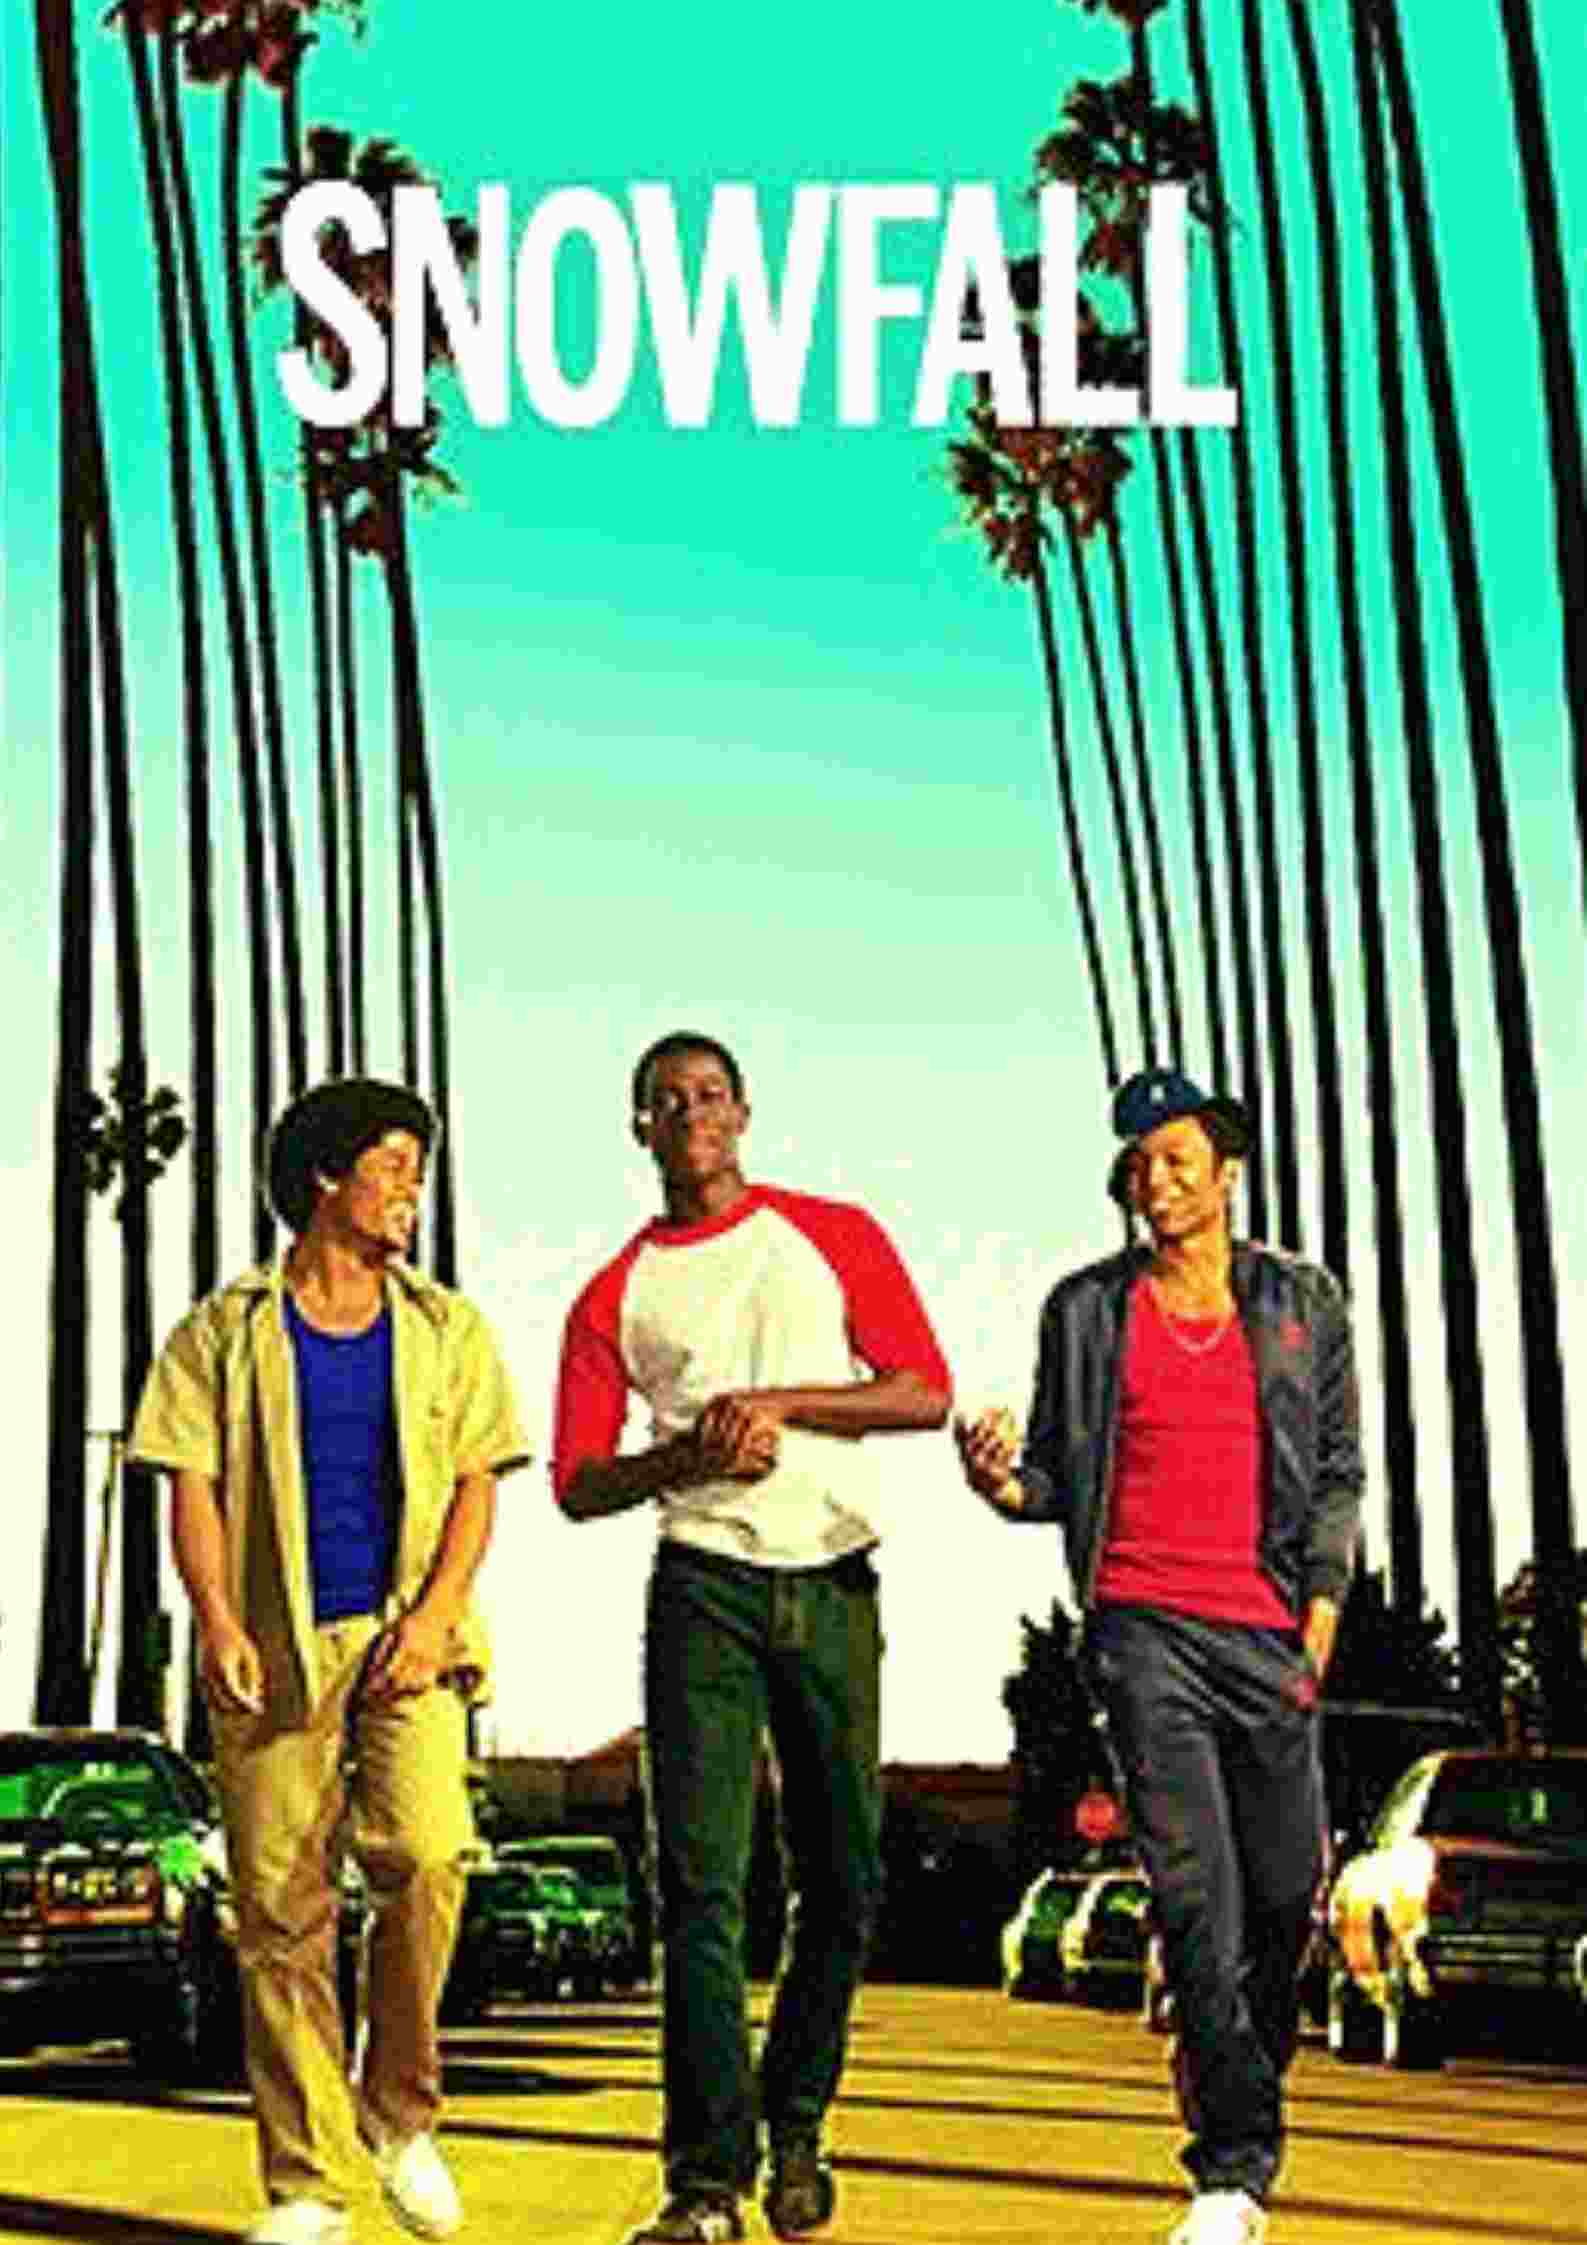 Snowfall parents guide and age rating | 2022